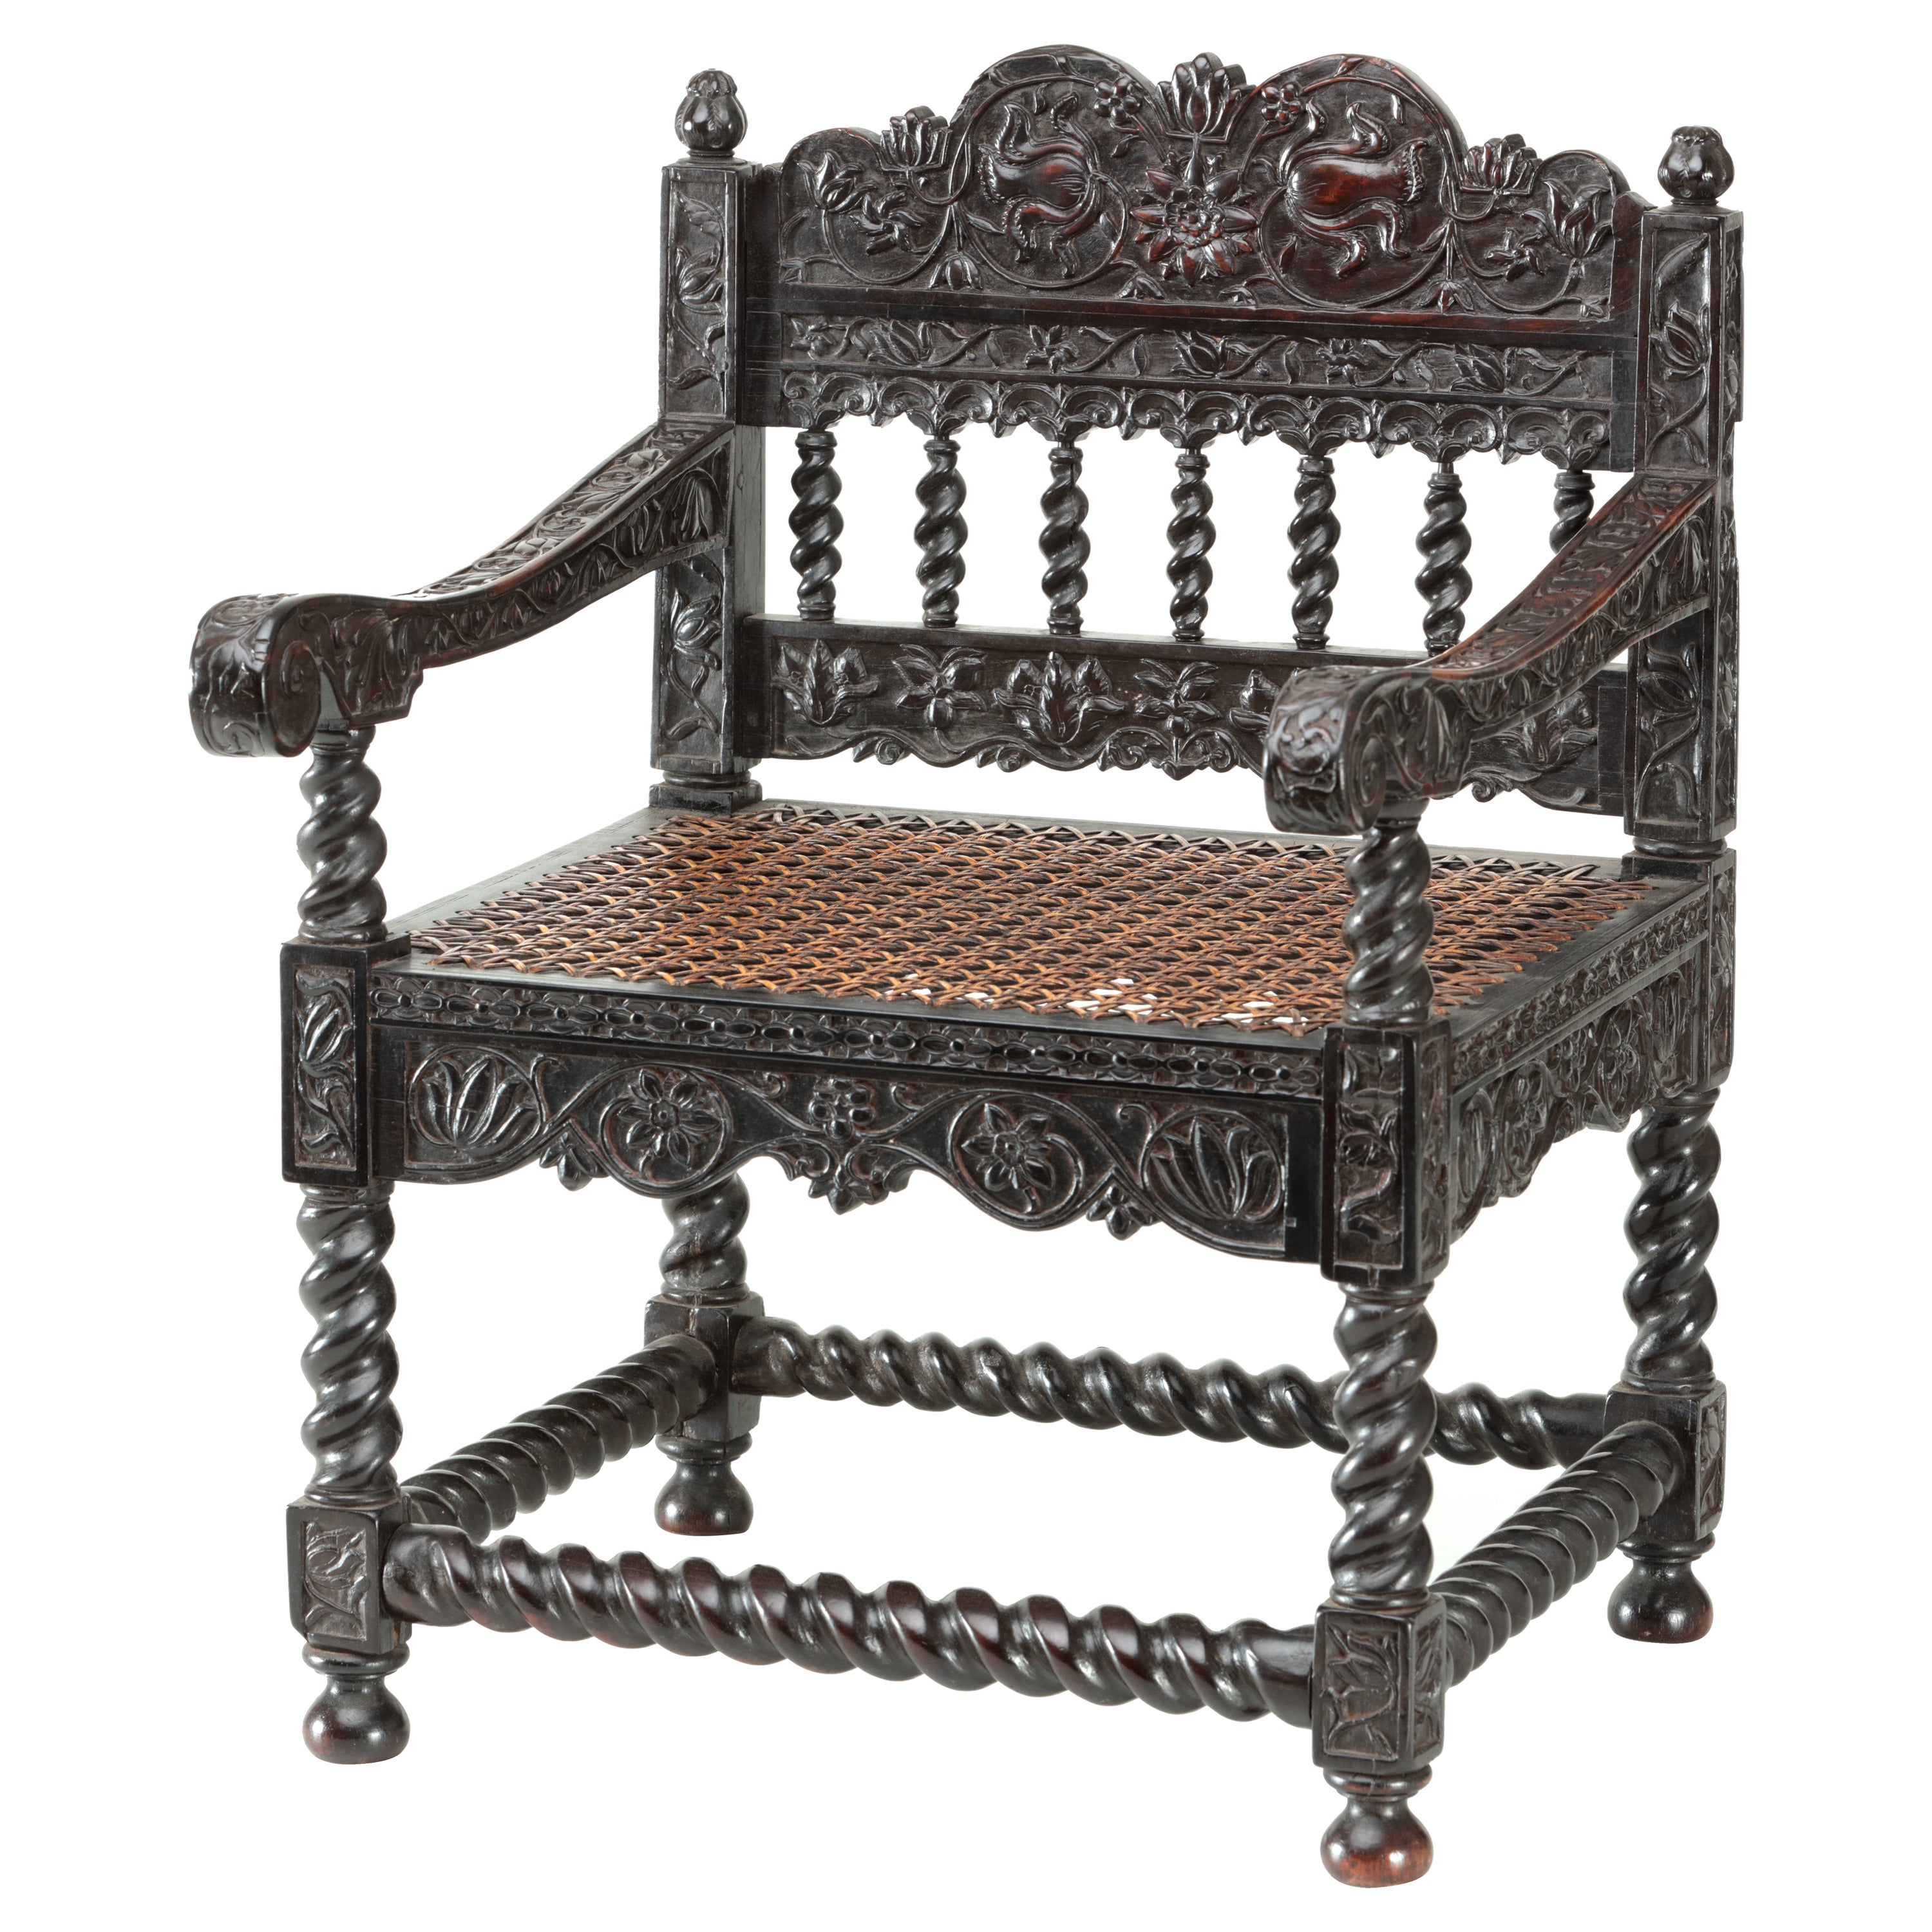 An extremely rare, possibly unique, Sri Lankan ebony child's armchair